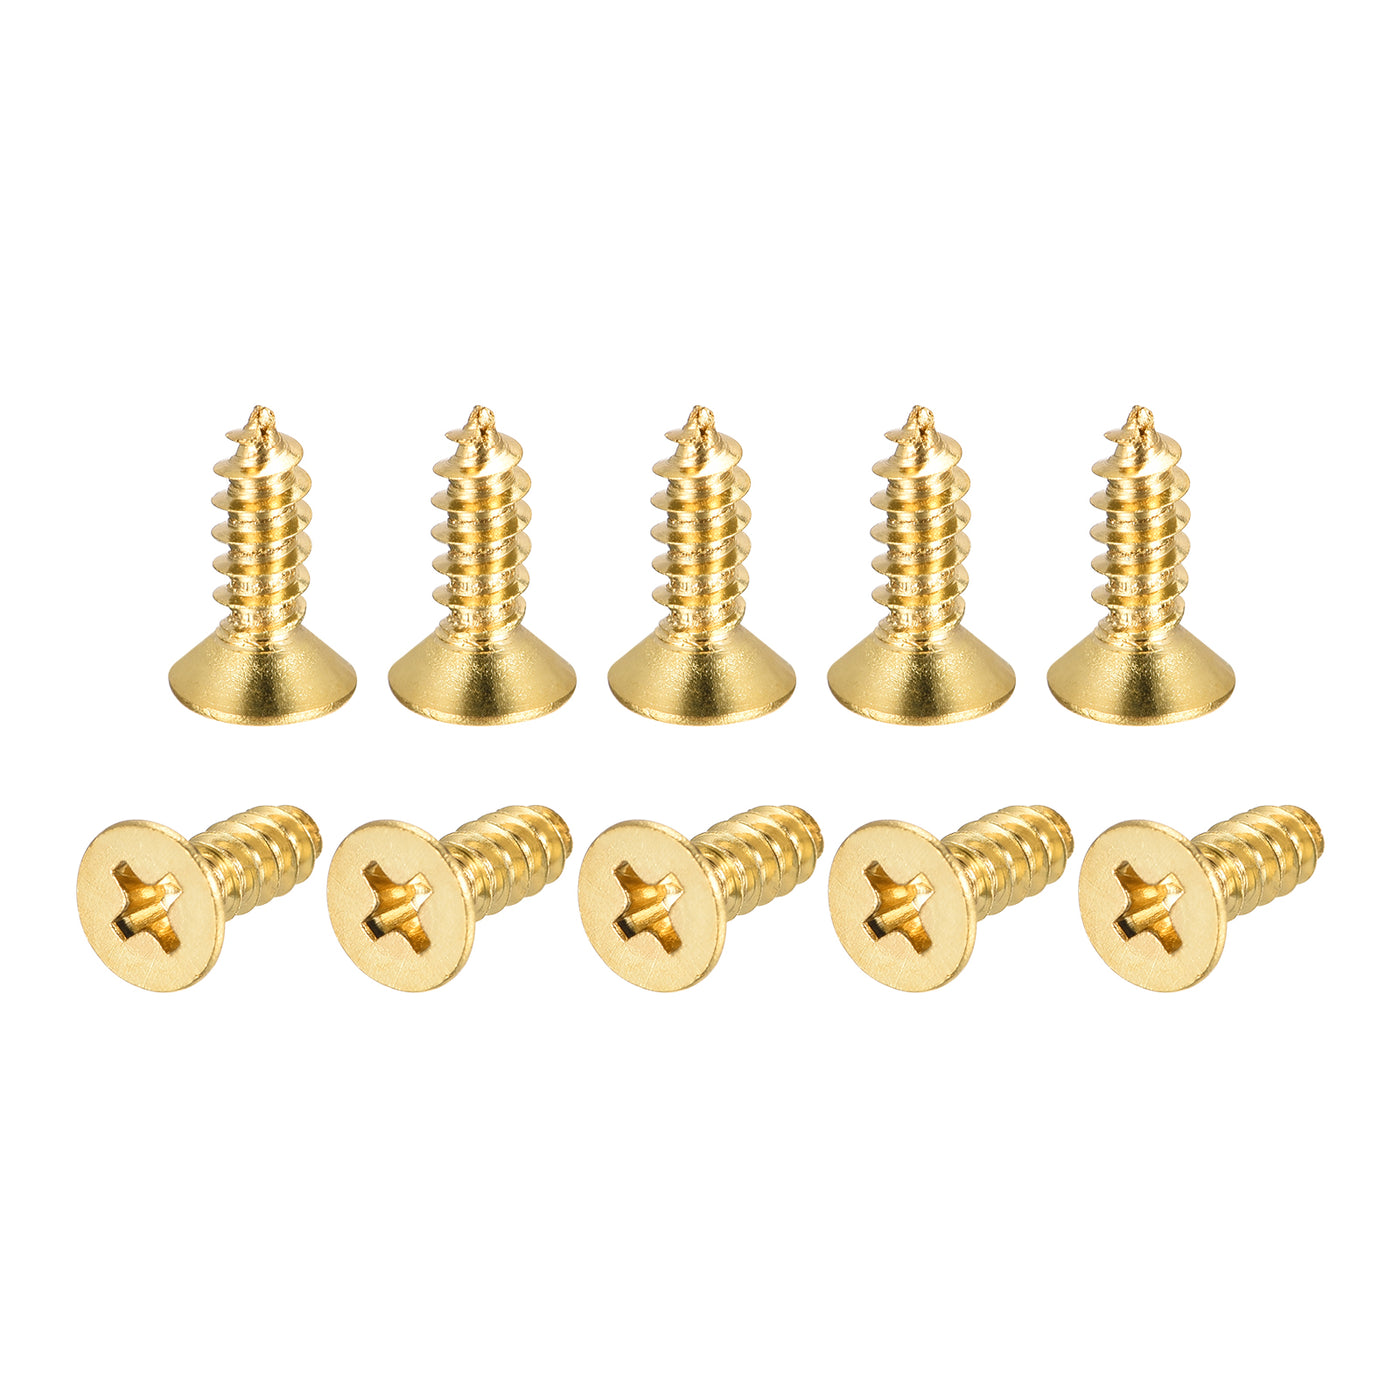 uxcell Uxcell Brass Wood Screws, M5x16mm Phillips Flat Head Self Tapping Connector for Door Hinges, Wooden Furniture, Home Appliances 100Pcs